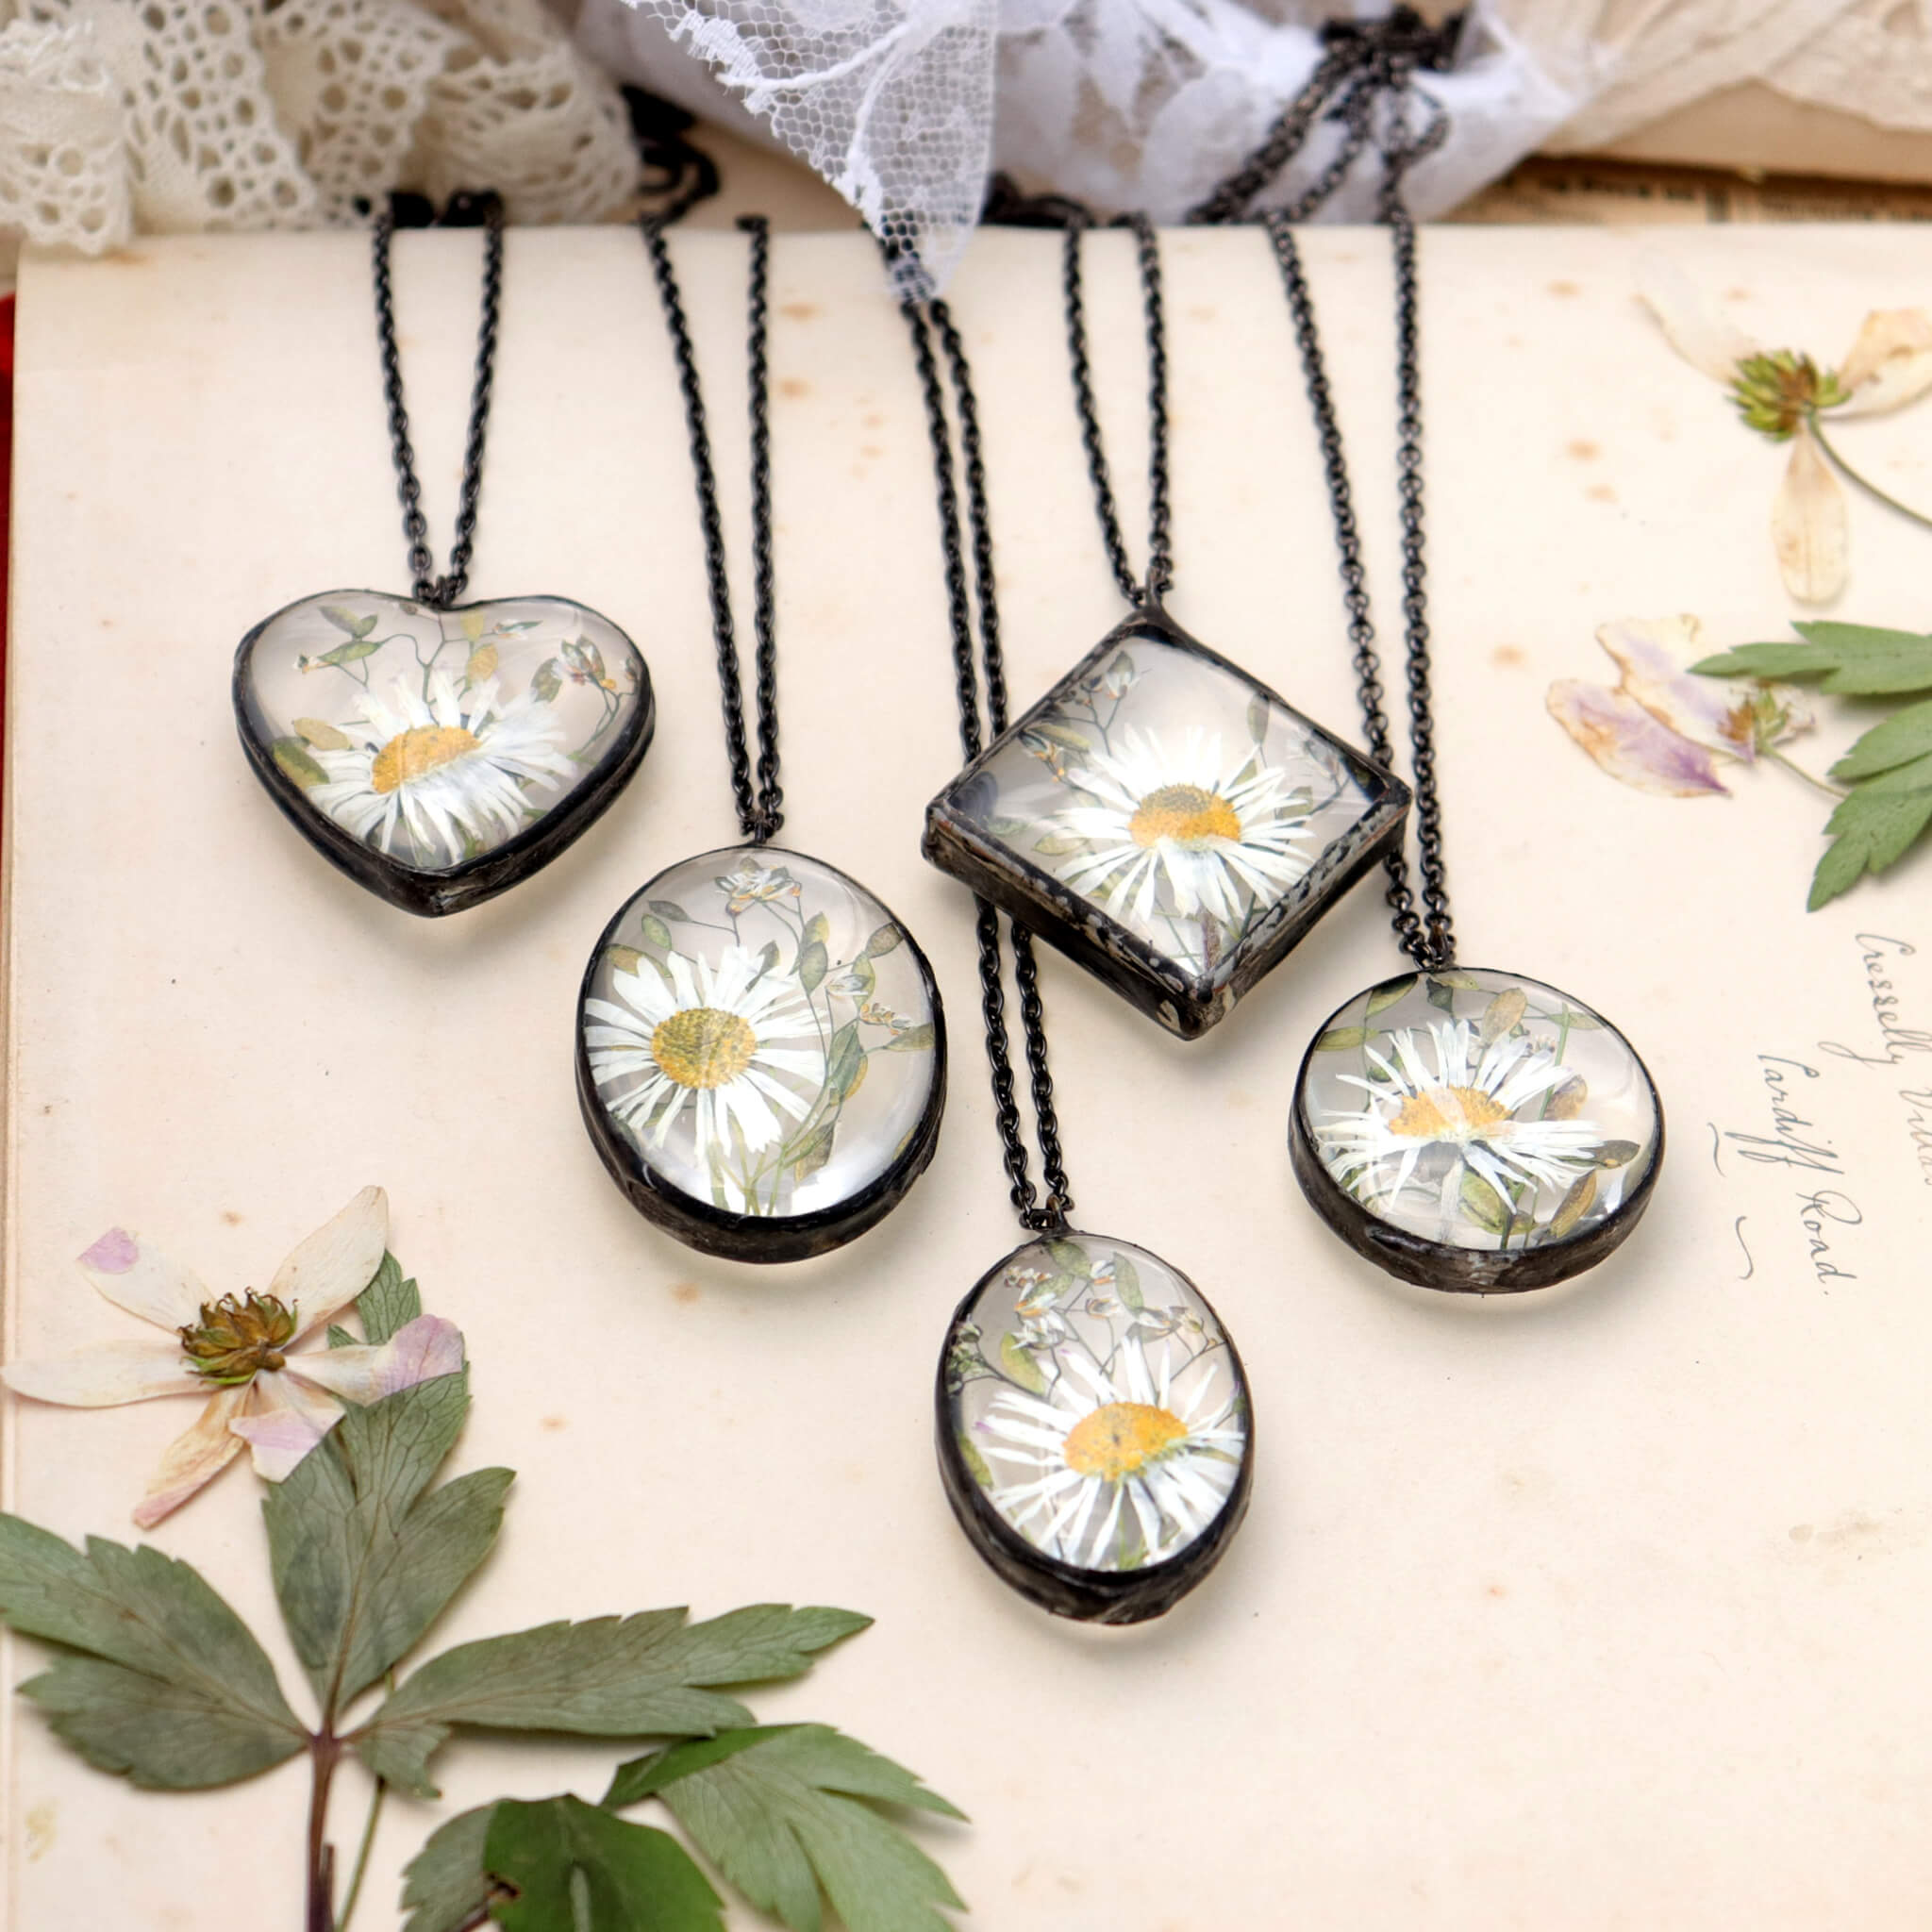 Pressed daisy necklaces lying side by side on an old paper. Pressed anemones on both sides